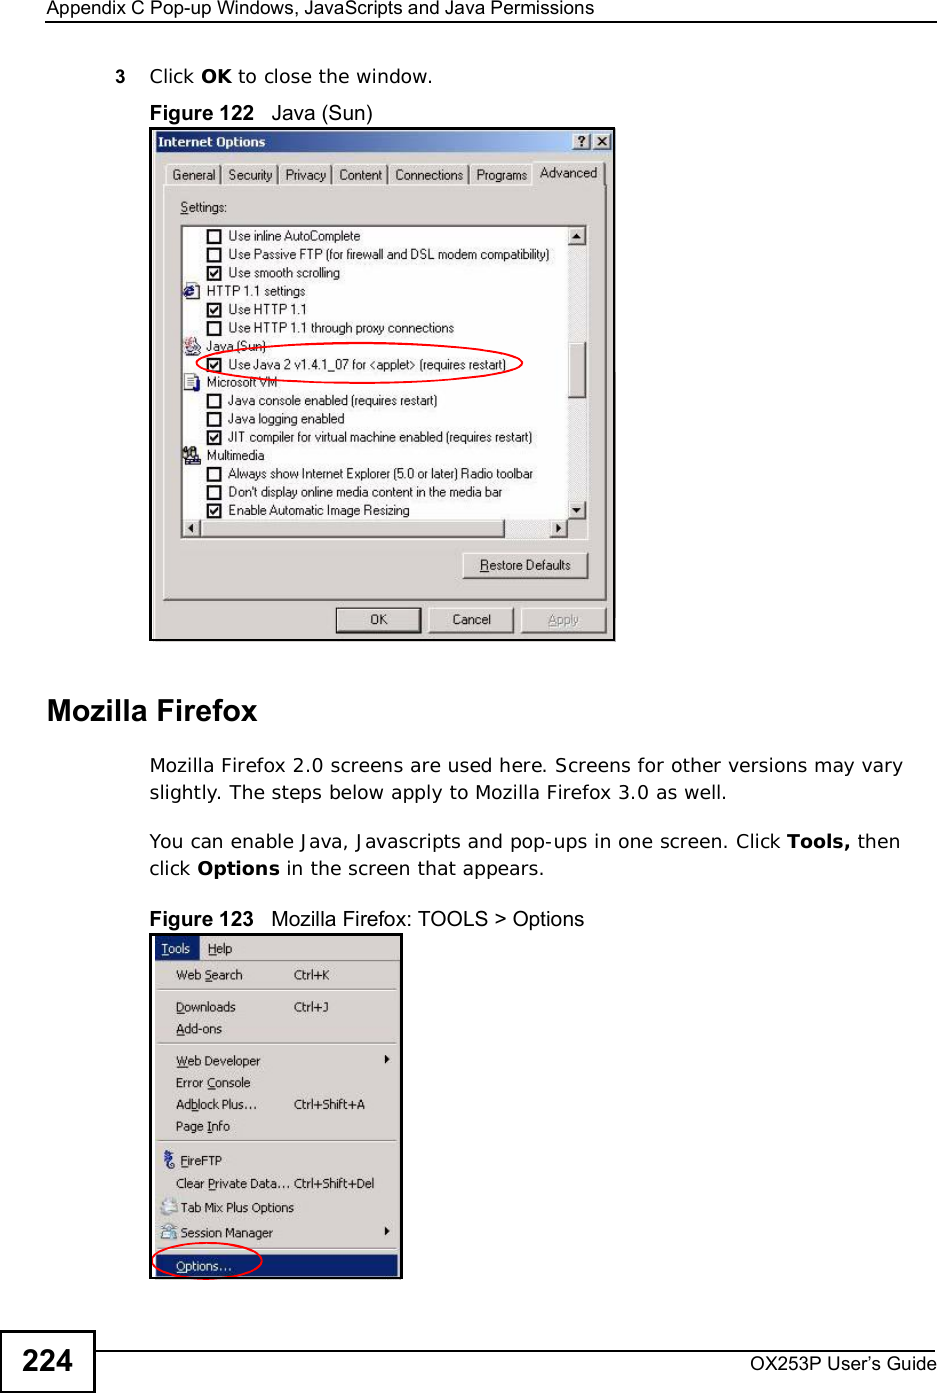 Appendix CPop-up Windows, JavaScripts and Java PermissionsOX253P User’s Guide2243Click OK to close the window.Figure 122   Java (Sun)Mozilla FirefoxMozilla Firefox 2.0 screens are used here. Screens for other versions may vary slightly. The steps below apply to Mozilla Firefox 3.0 as well.You can enable Java, Javascripts and pop-ups in one screen. Click Tools, then click Options in the screen that appears.Figure 123   Mozilla Firefox: TOOLS &gt; Options